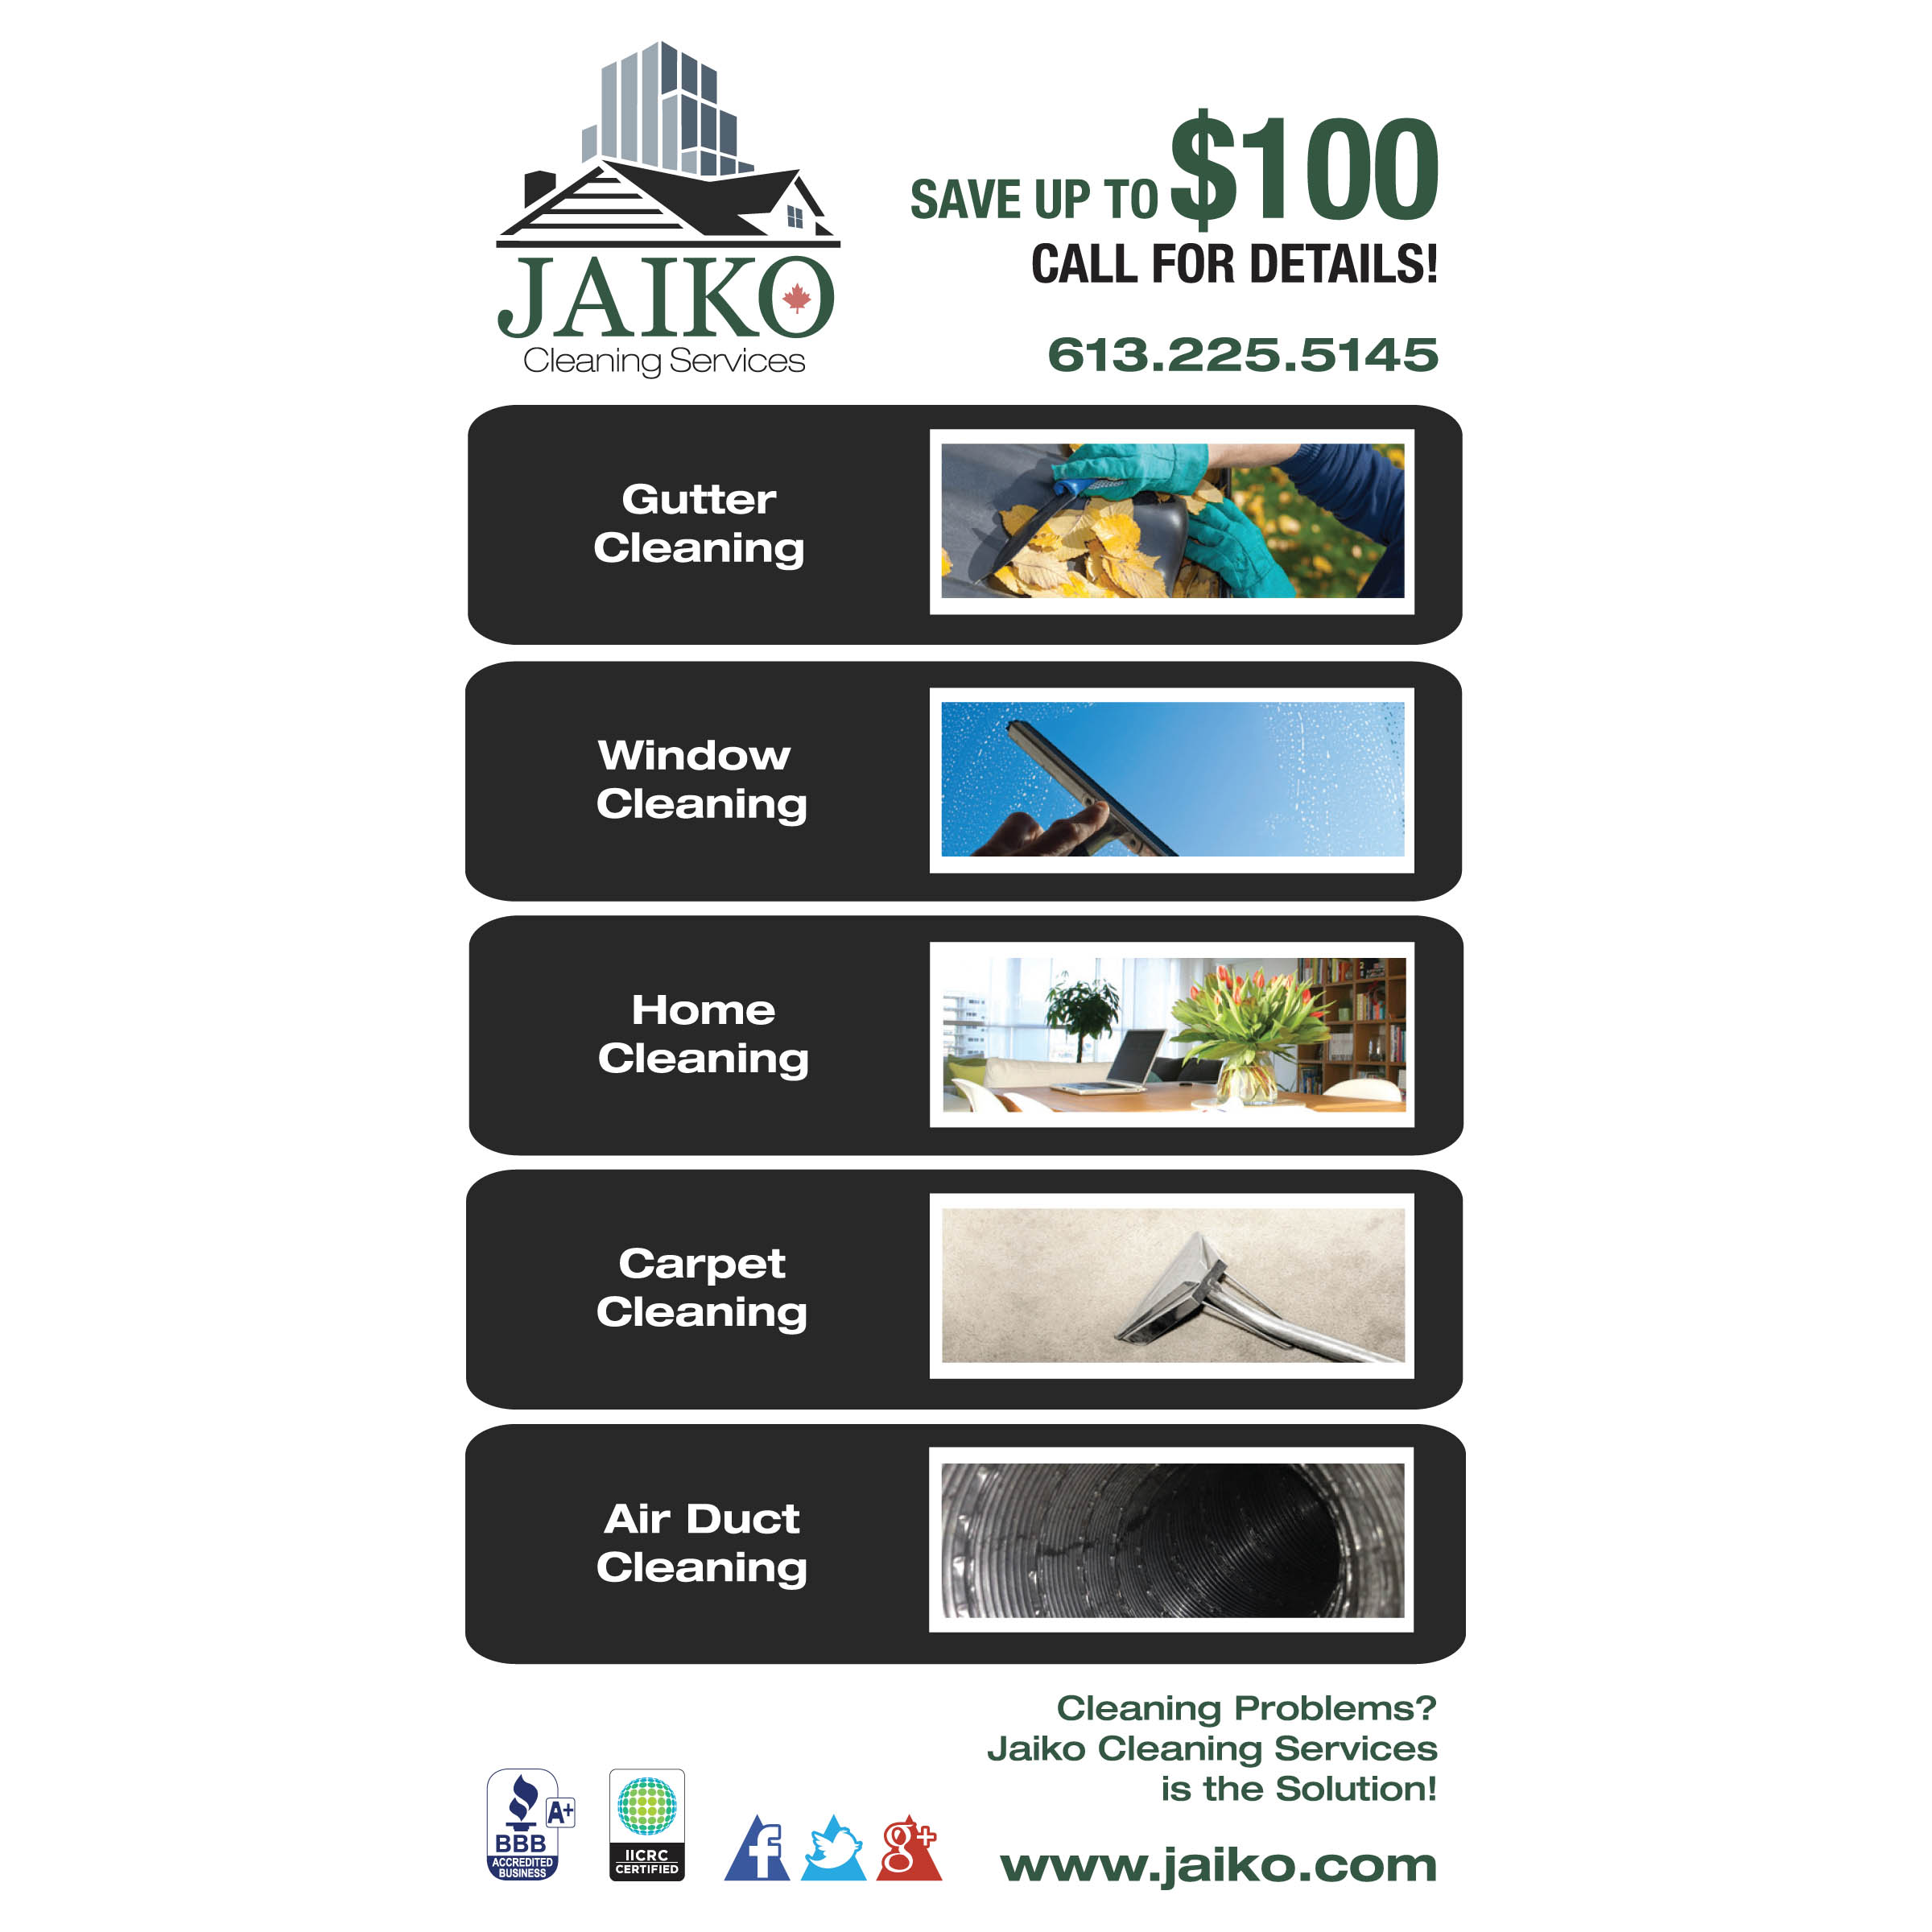 Save up to $100